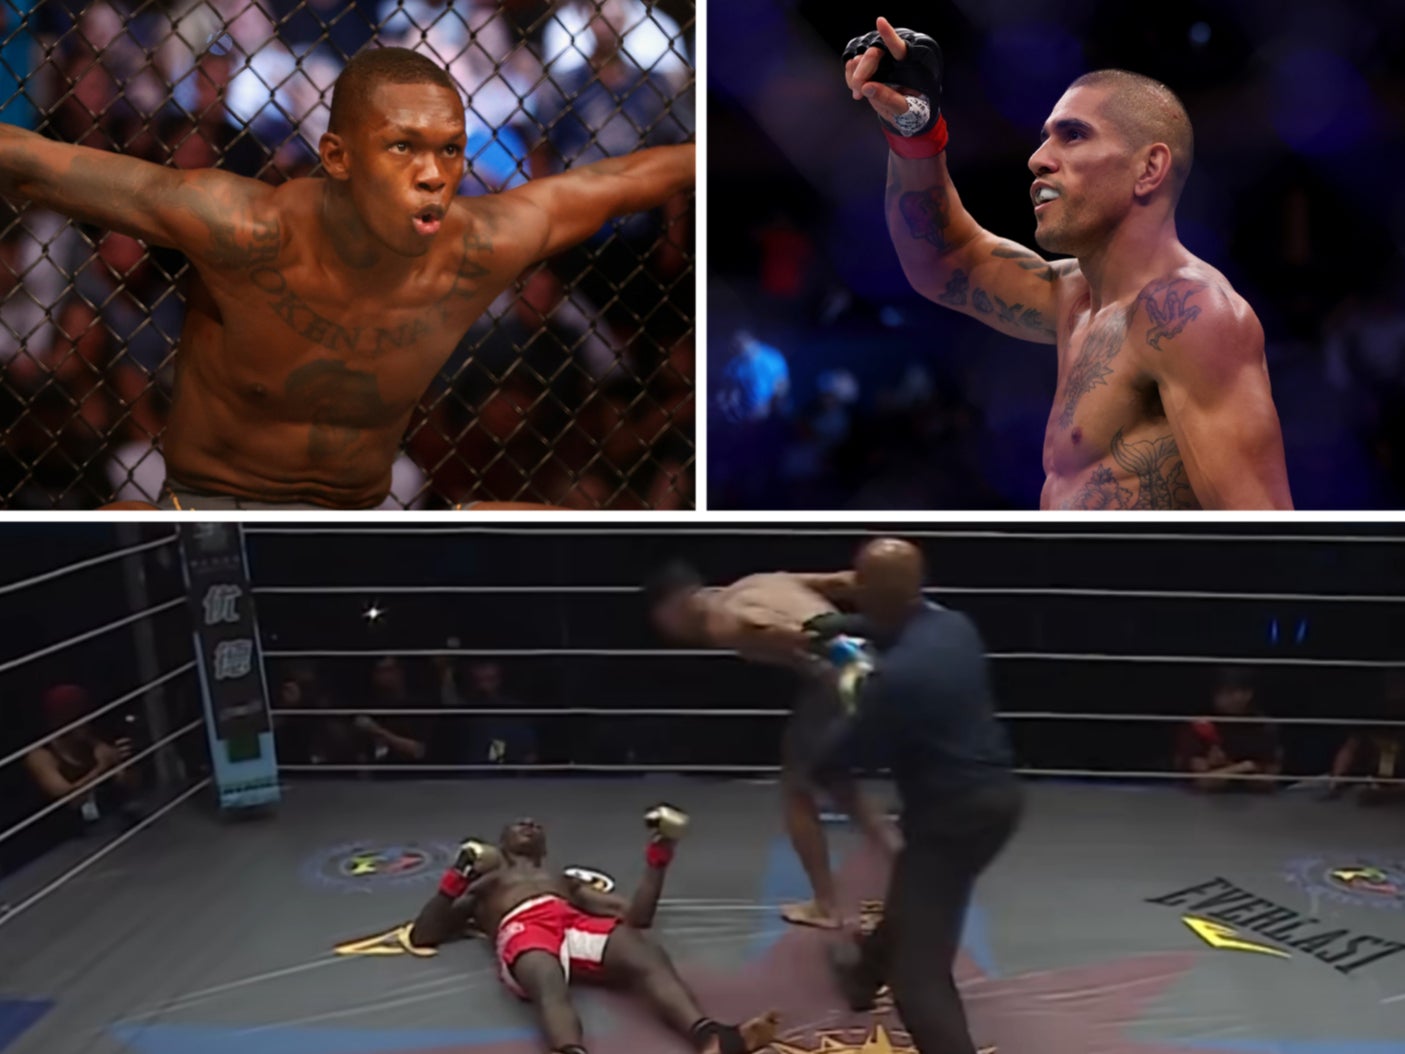 Israel Adesanya (top left) was knocked out by Alex Pereira in a 2017 kickboxing bout